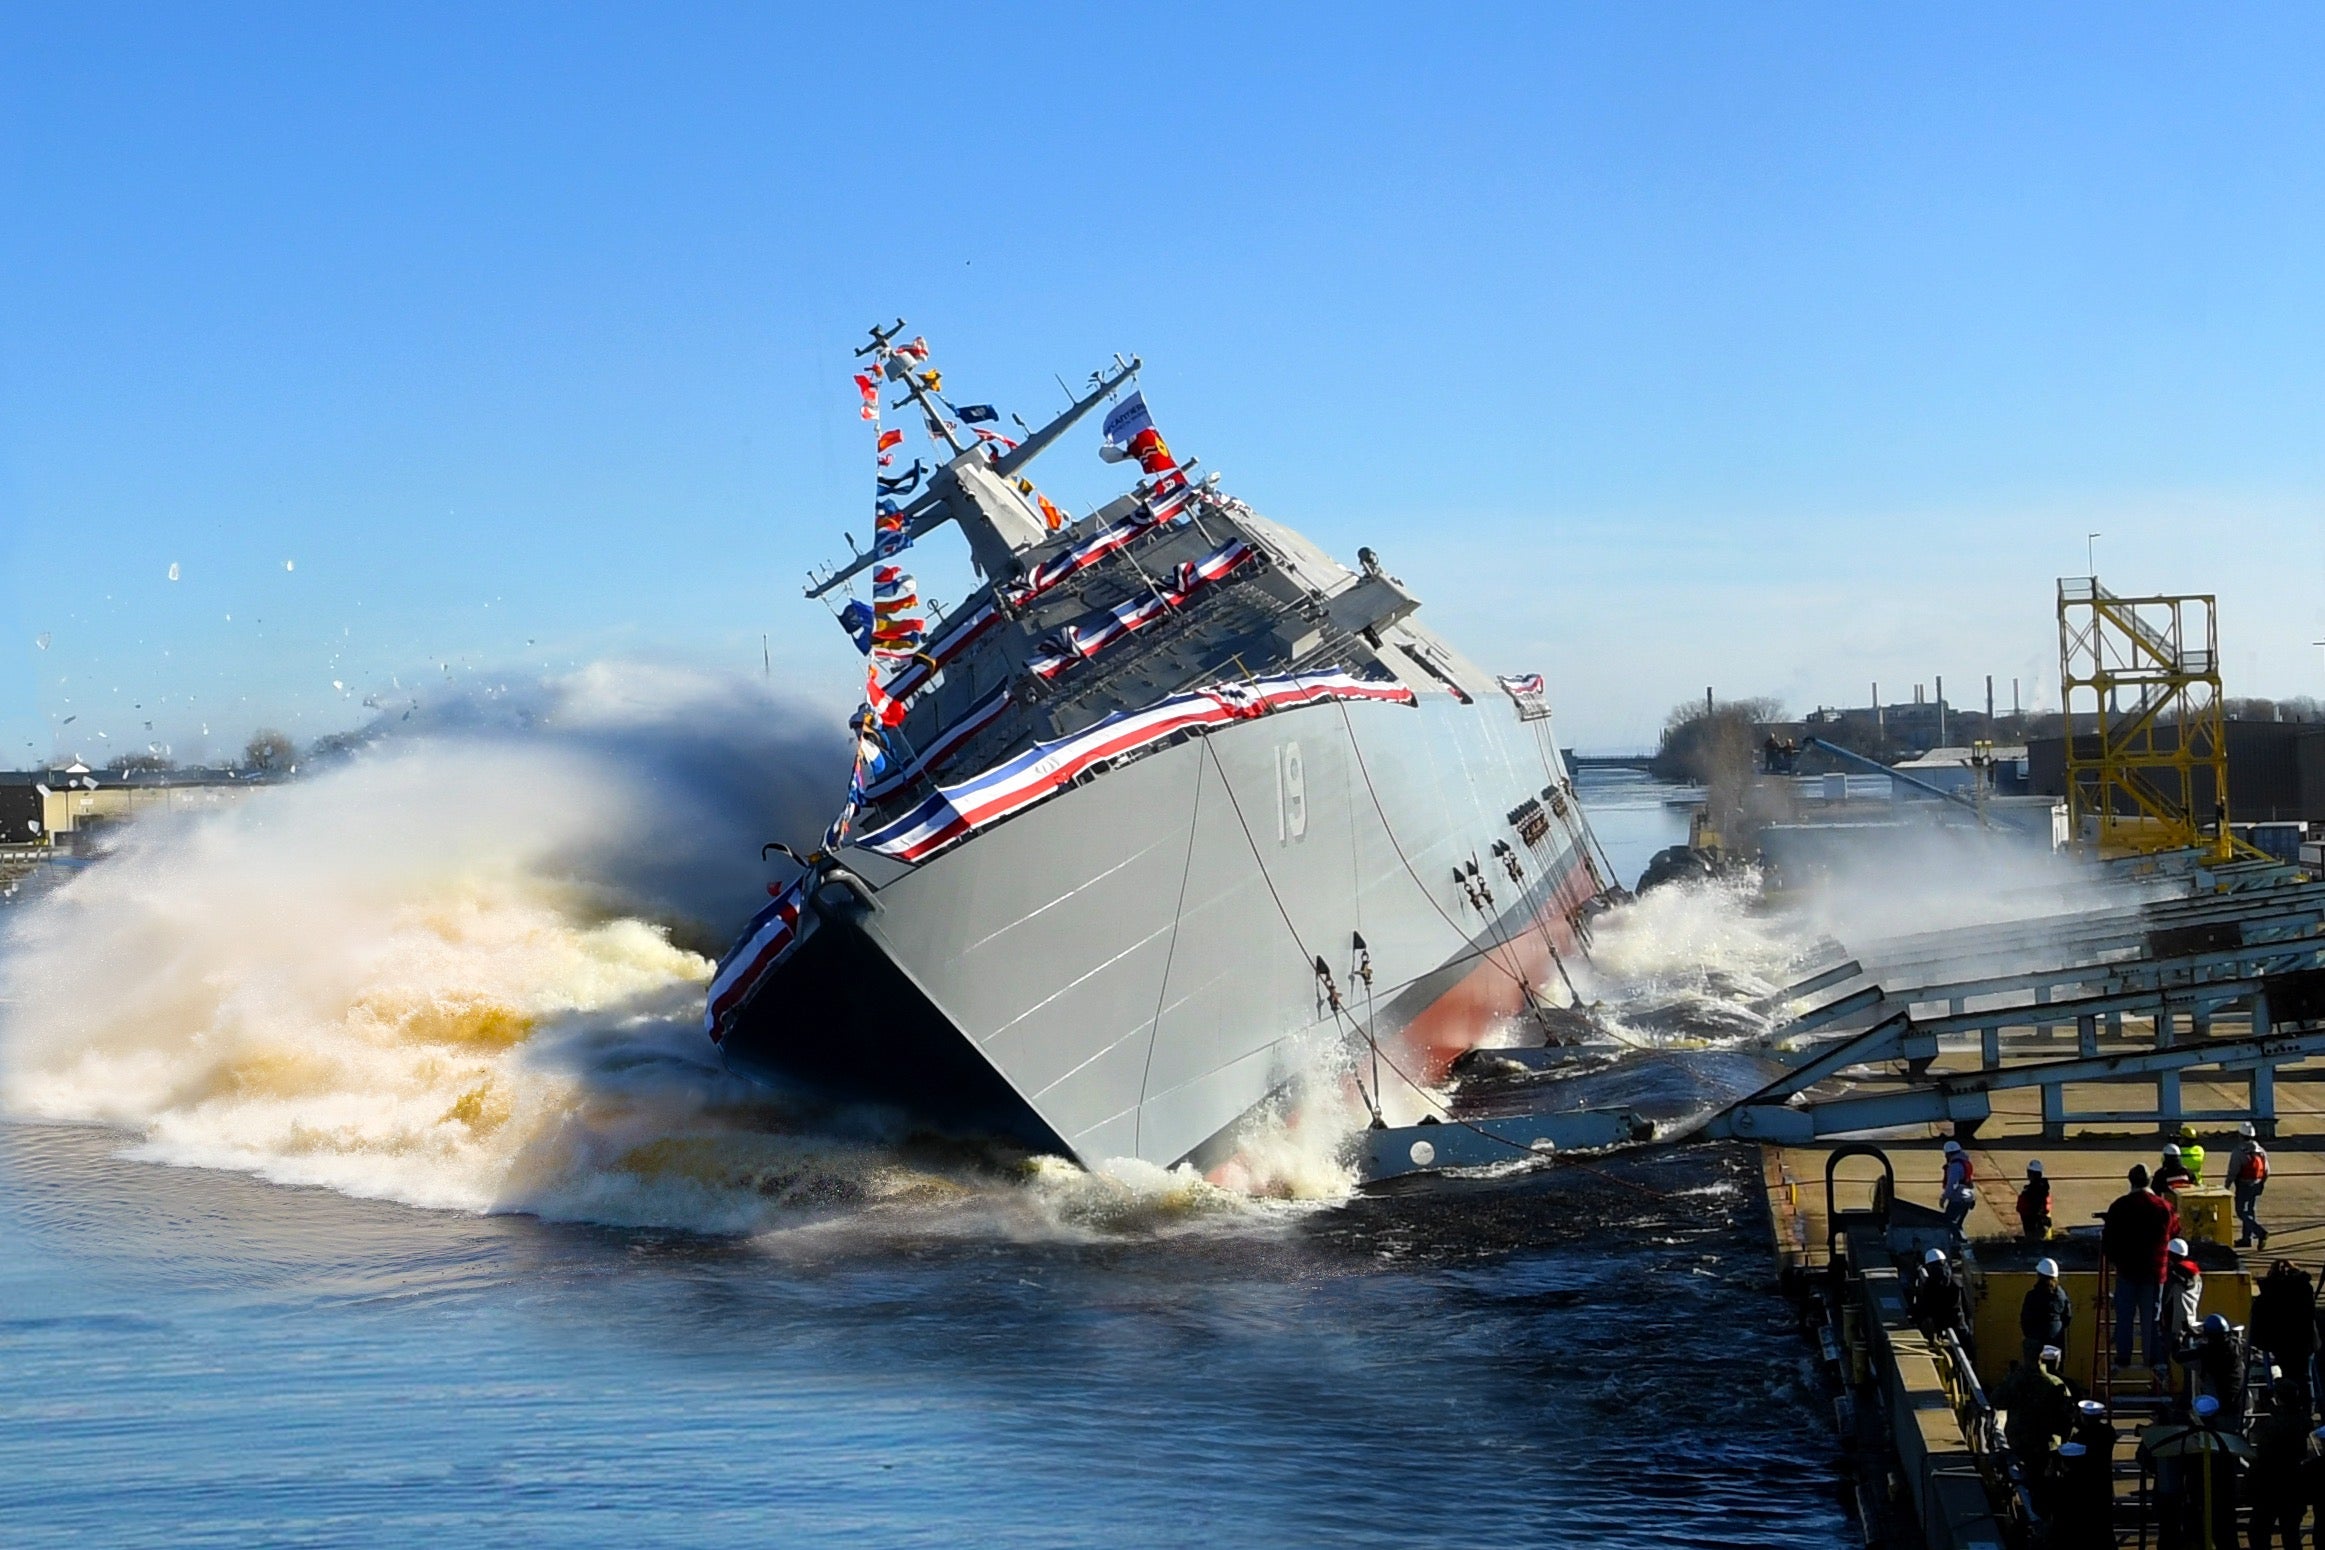 181215-N-N0101-198
MARINETTE, Wisc. (Dec. 15, 2018) The  future littoral combat ship USS St. Louis (LCS 19) launches sideways into the Menominee River in Marinette, Wisconsin, following its christening, Dec. 15, 2018, by ship's sponsor Barbara Taylor. Once commissioned, LCS-19 will be the seventh ship to bear the name St. Louis. (U.S. Navy photo/Released)